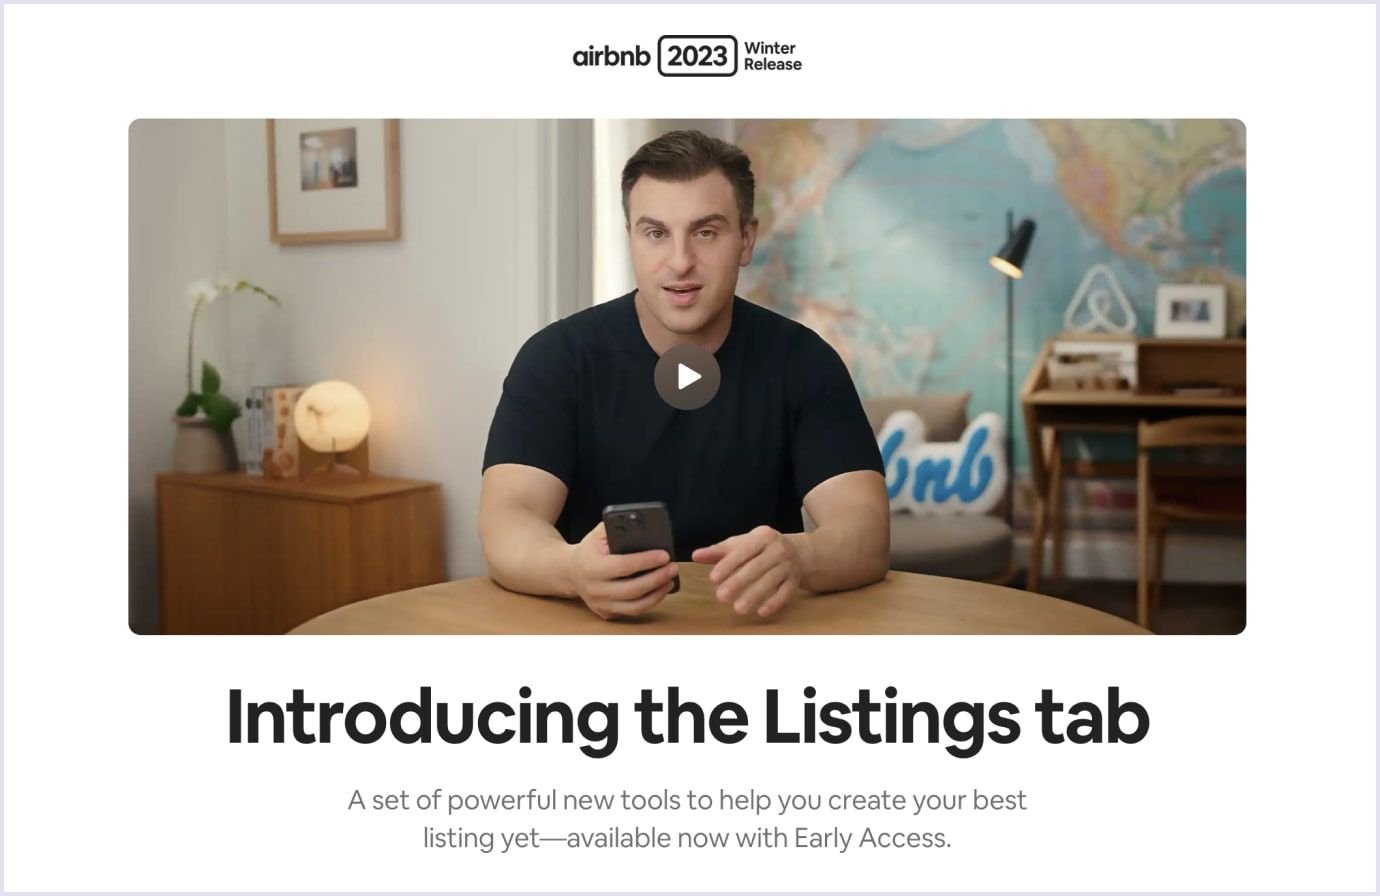 Listings feature on Airbnb